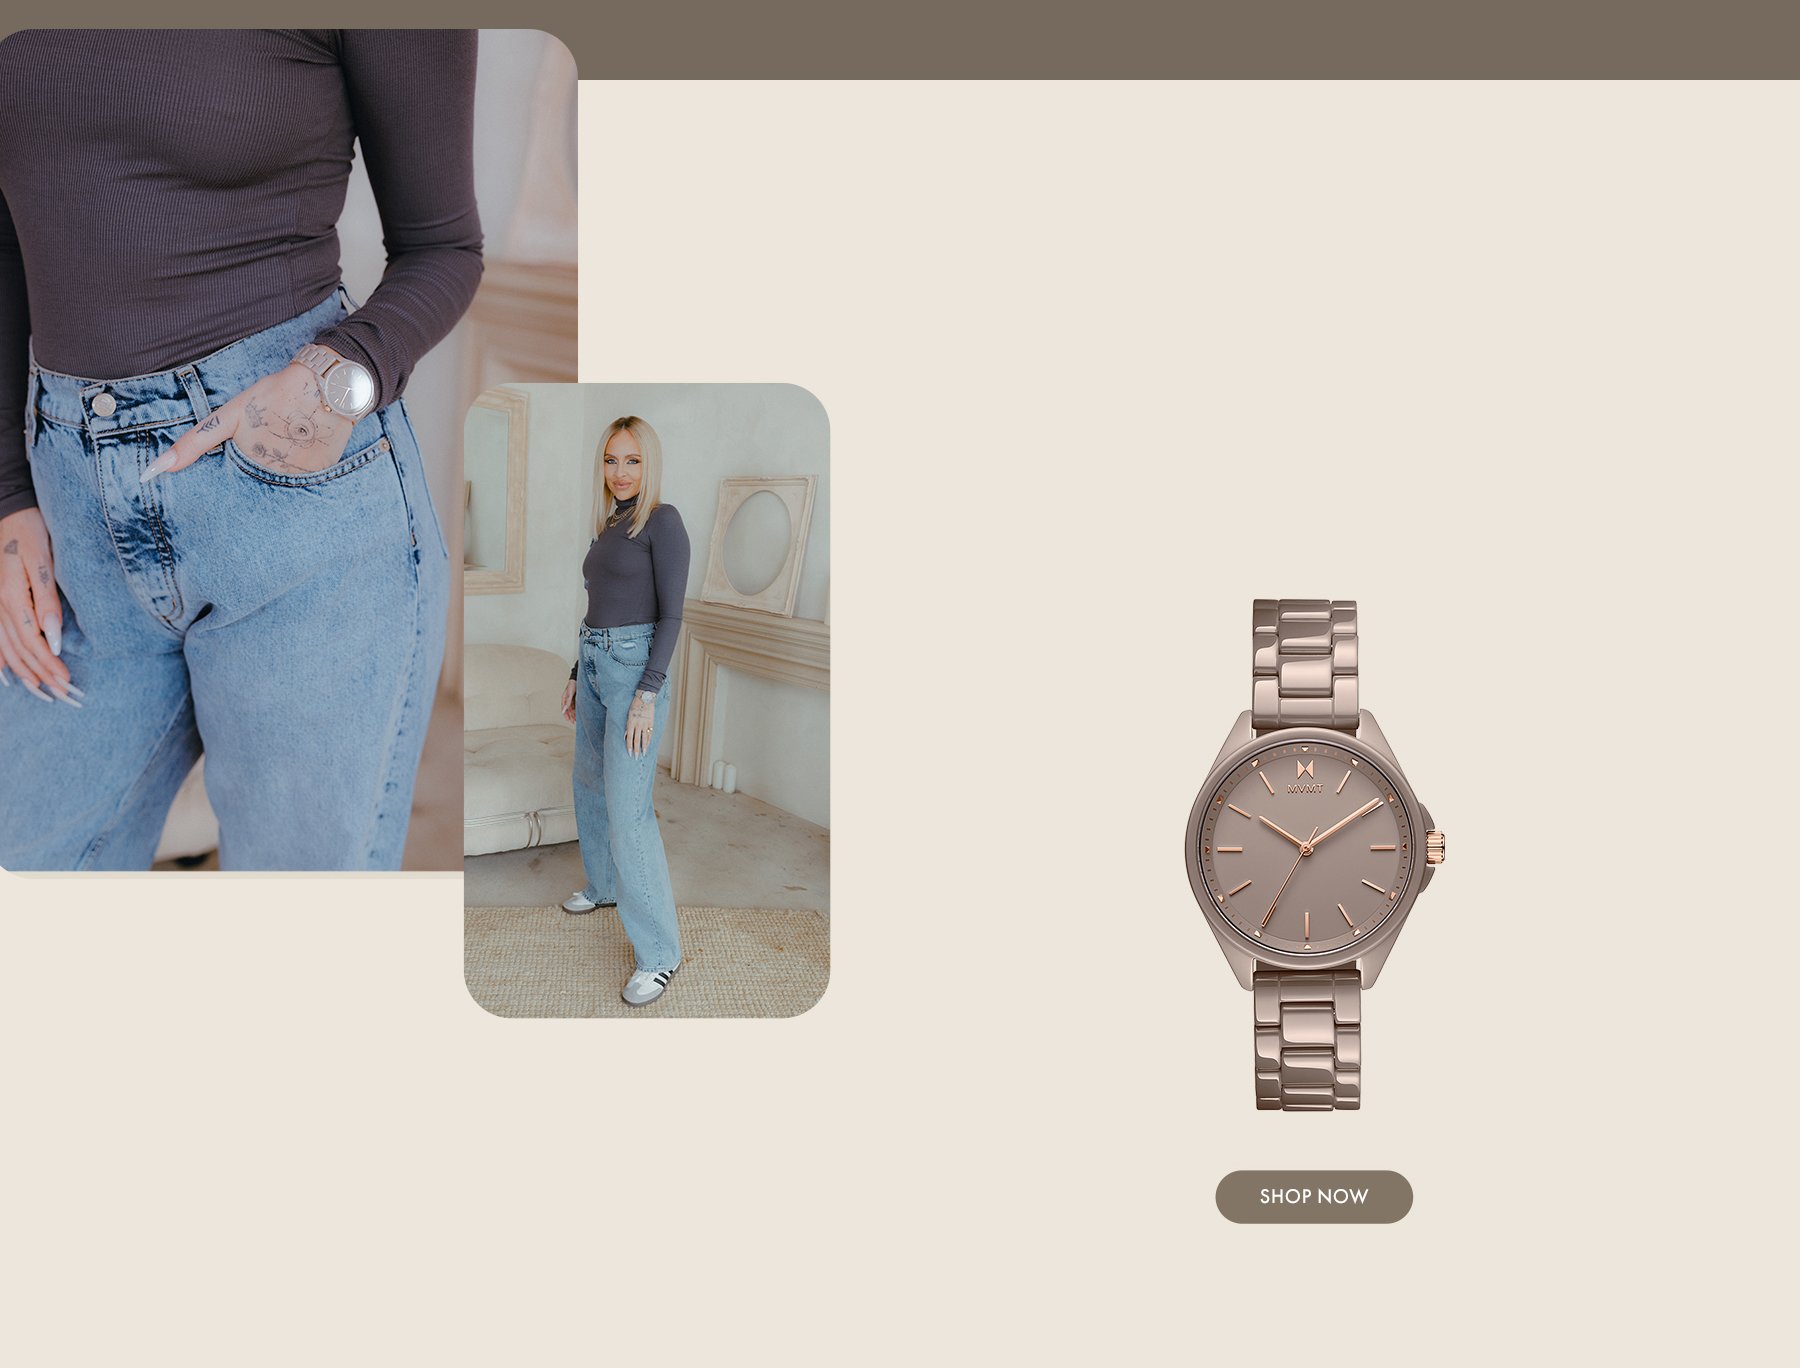 Maeve in grey top and blue jeans wearing MVMT cashmere taupe ceramic watch